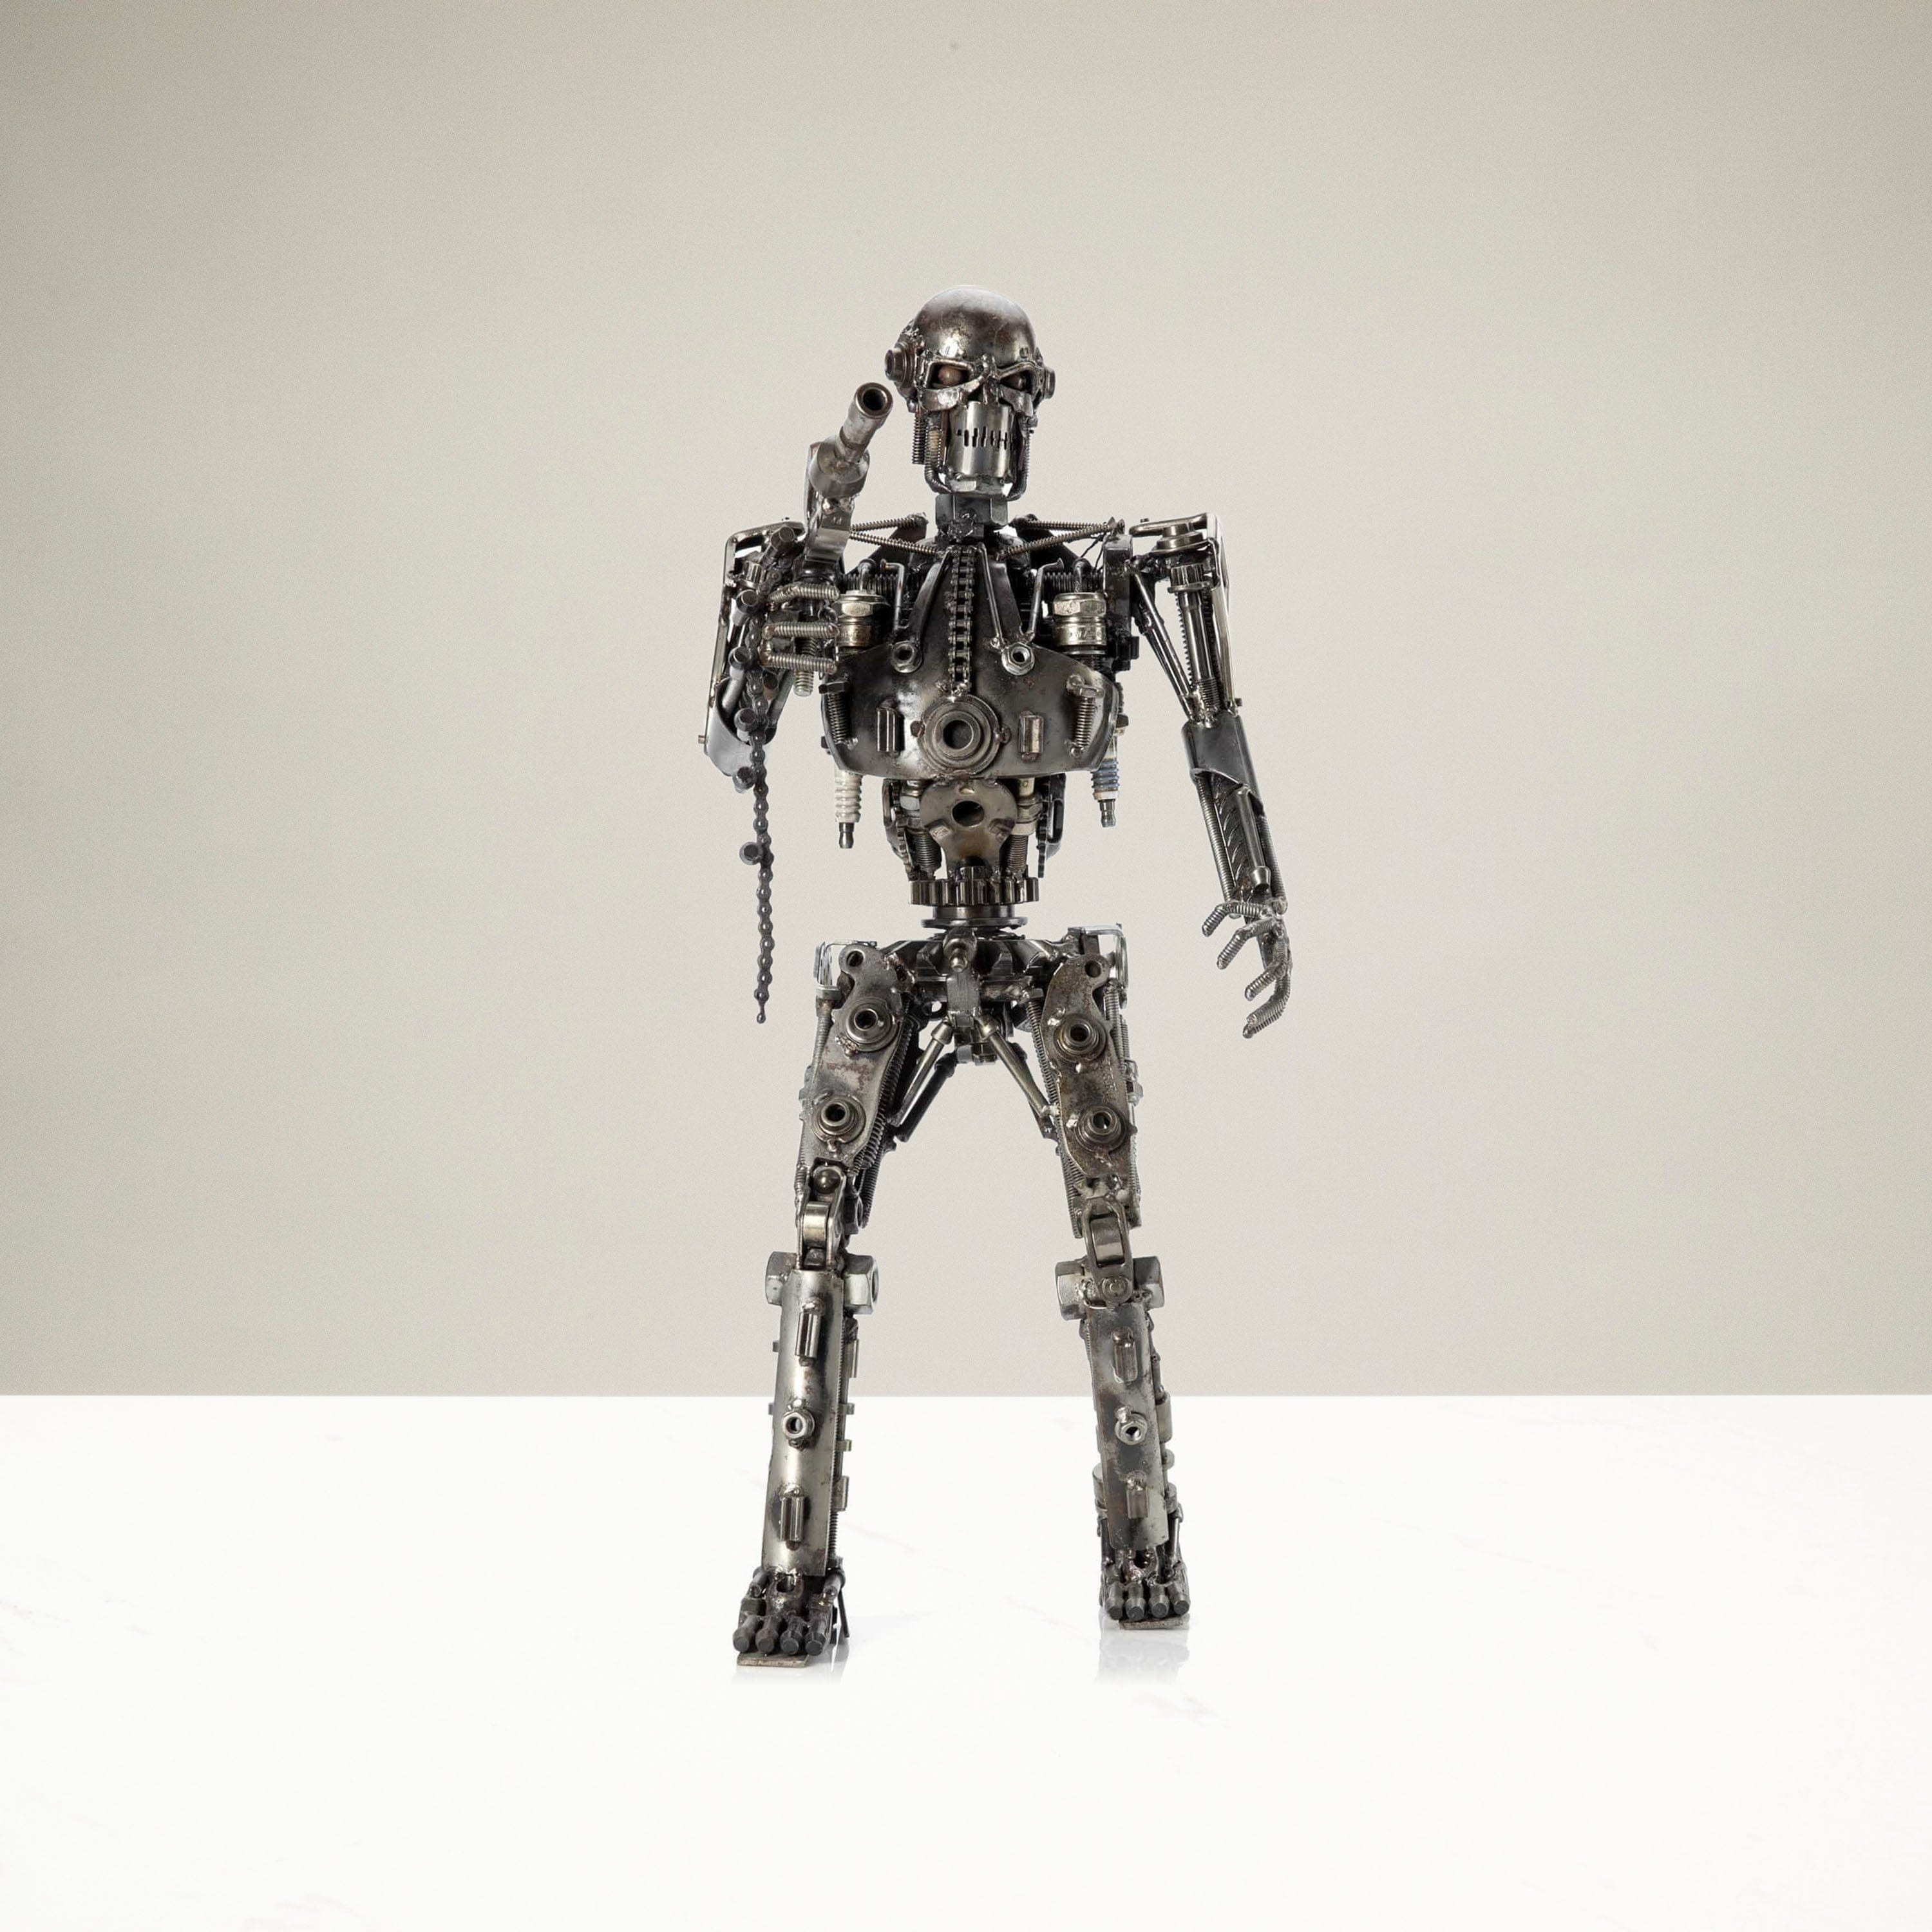 Kalifano Recycled Metal Art 22" Terminator Inspired Recycled Metal Sculpture RMS-T52x30-S